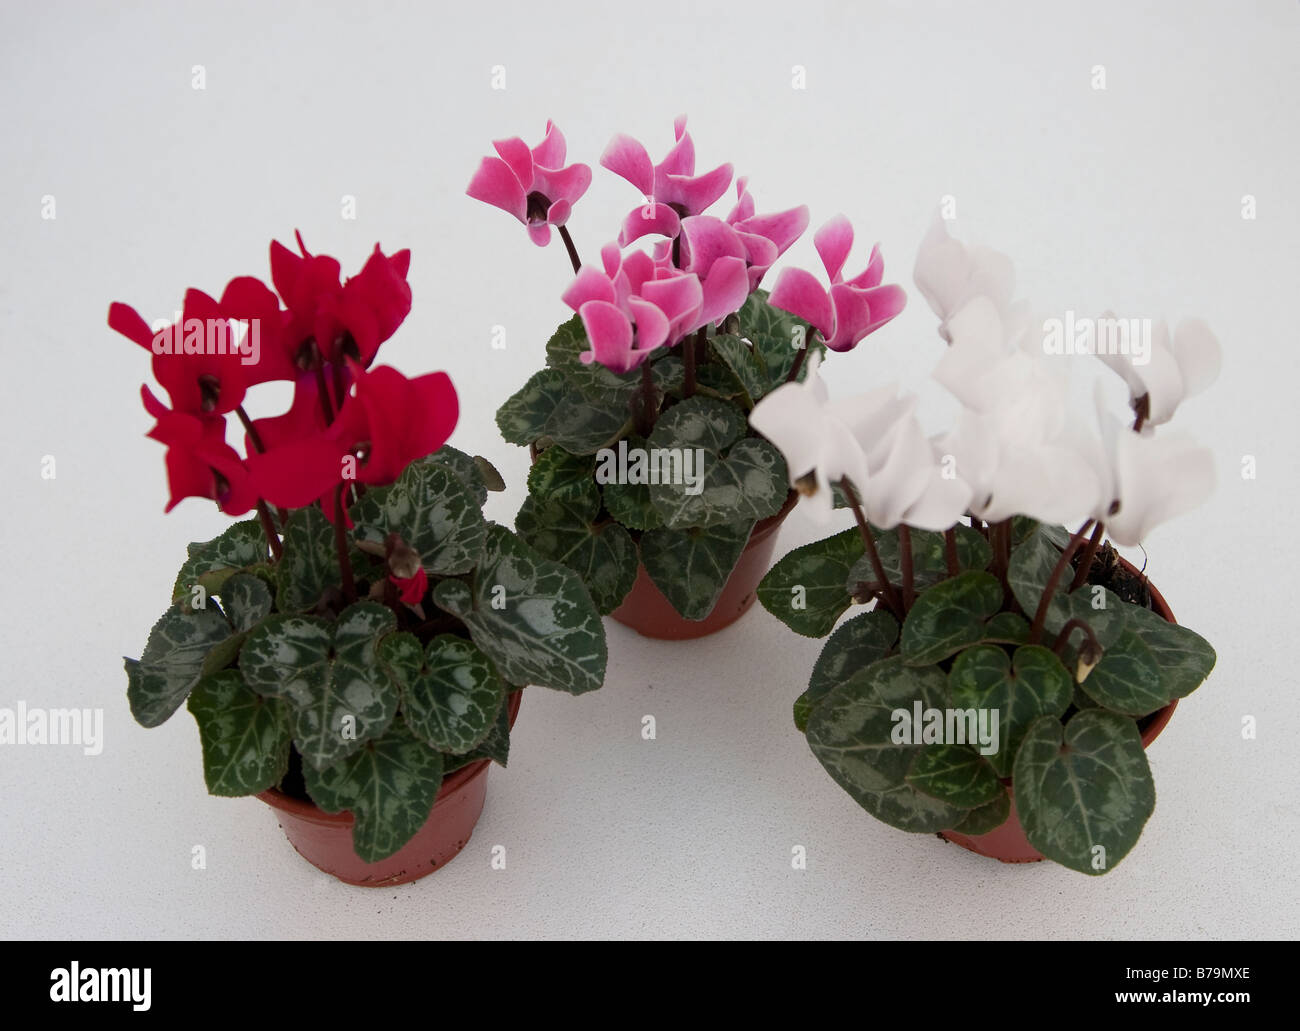 Red, pink and white Cyclamen pot plants Stock Photo